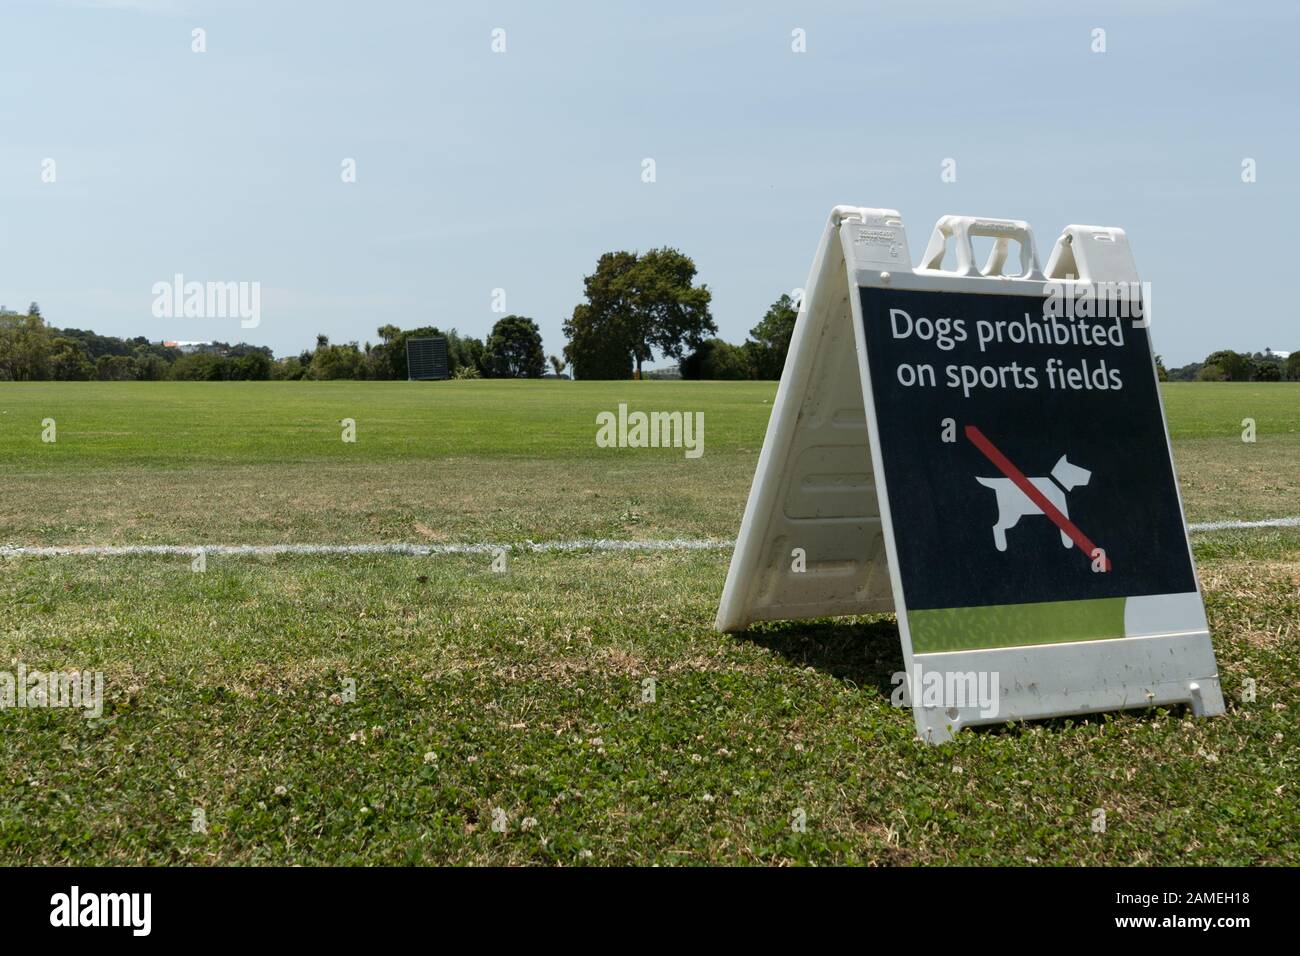 Dogs prohibited on sports field portable plastic sign grass cricket pitch Parnell cricket club, Parnell, Auckland, New Zealand. Stock Photo